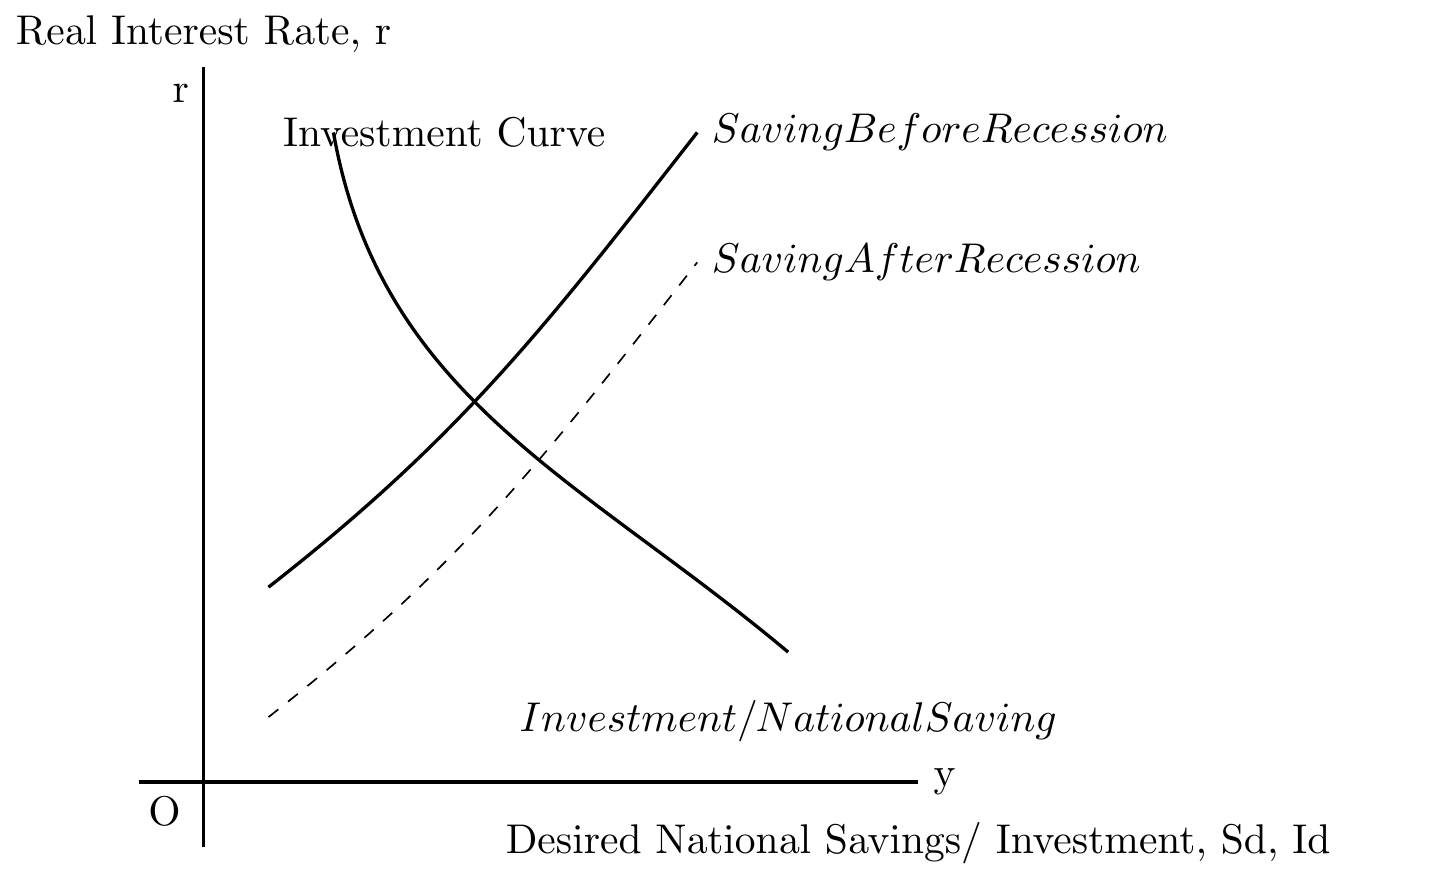 Shift in Savings Curve Due to Recession: At any value new value of r, more private saving